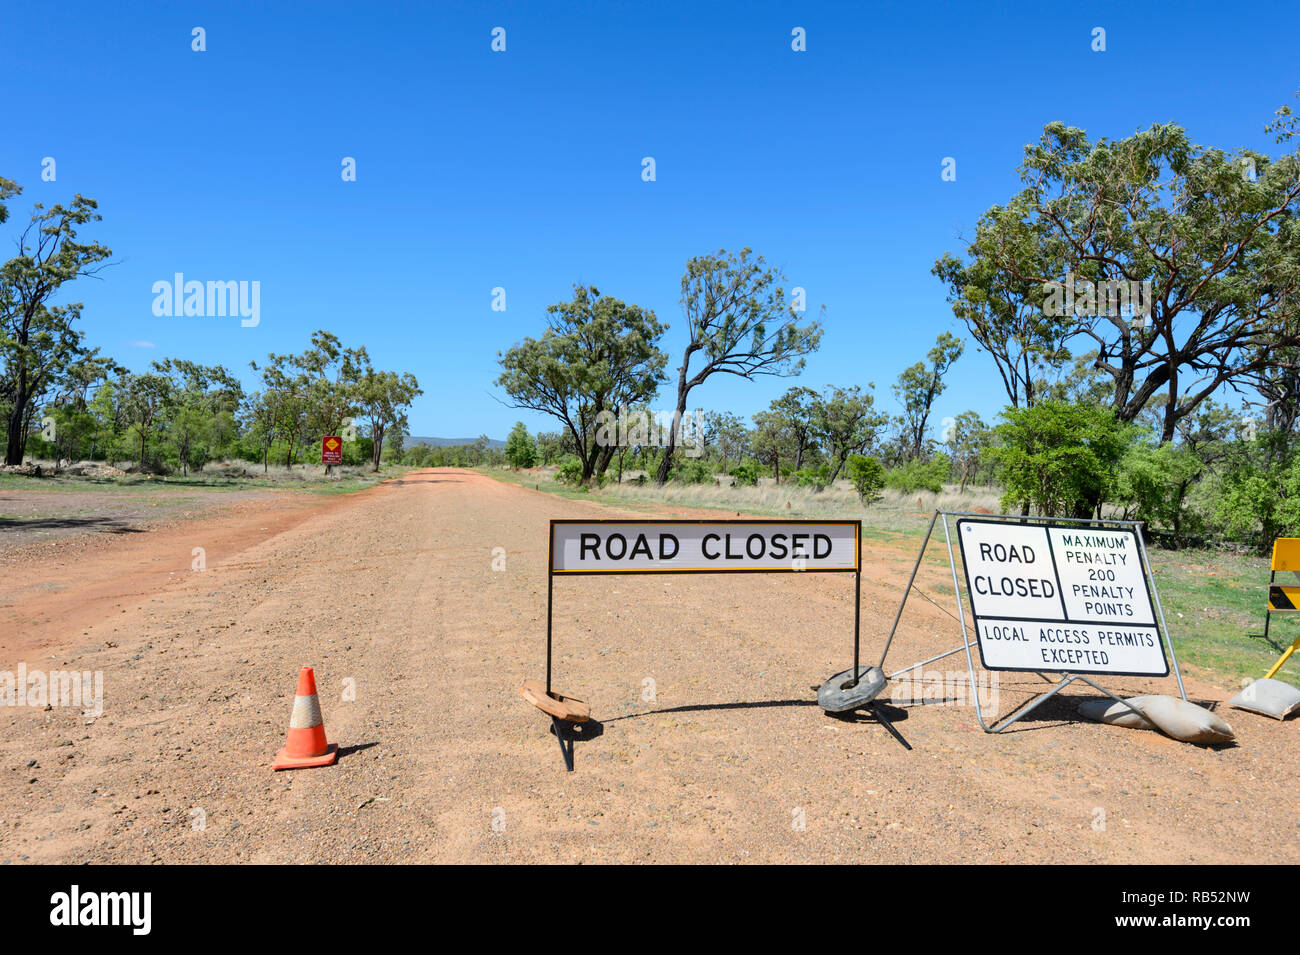 Road Closed sign on dirt road leading from Mount Surprise to Einasleigh, Queensland, QLD, Australia Stock Photo